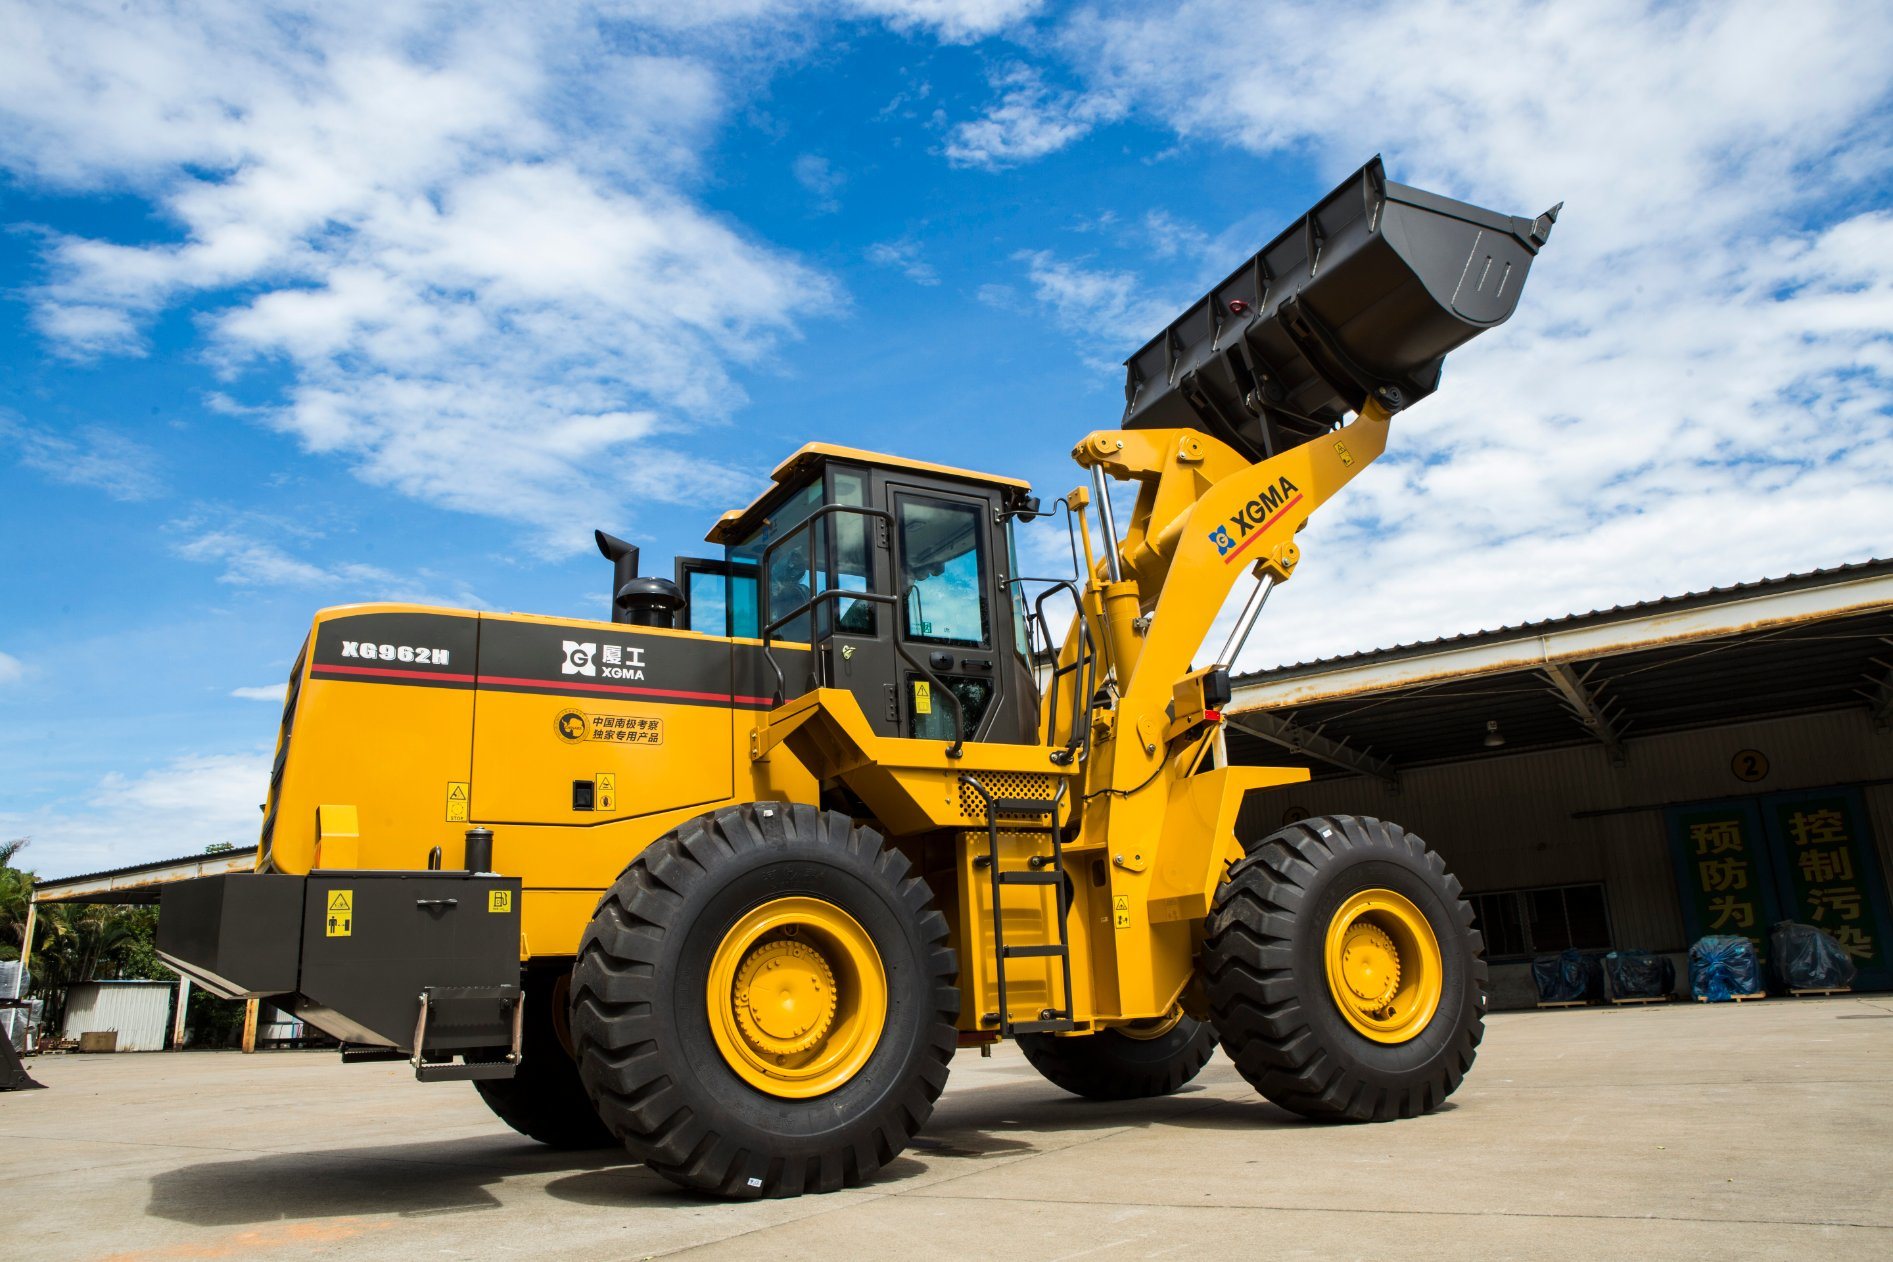 Chinese Xg956n 5ton Wheel Loader with Pilot Control